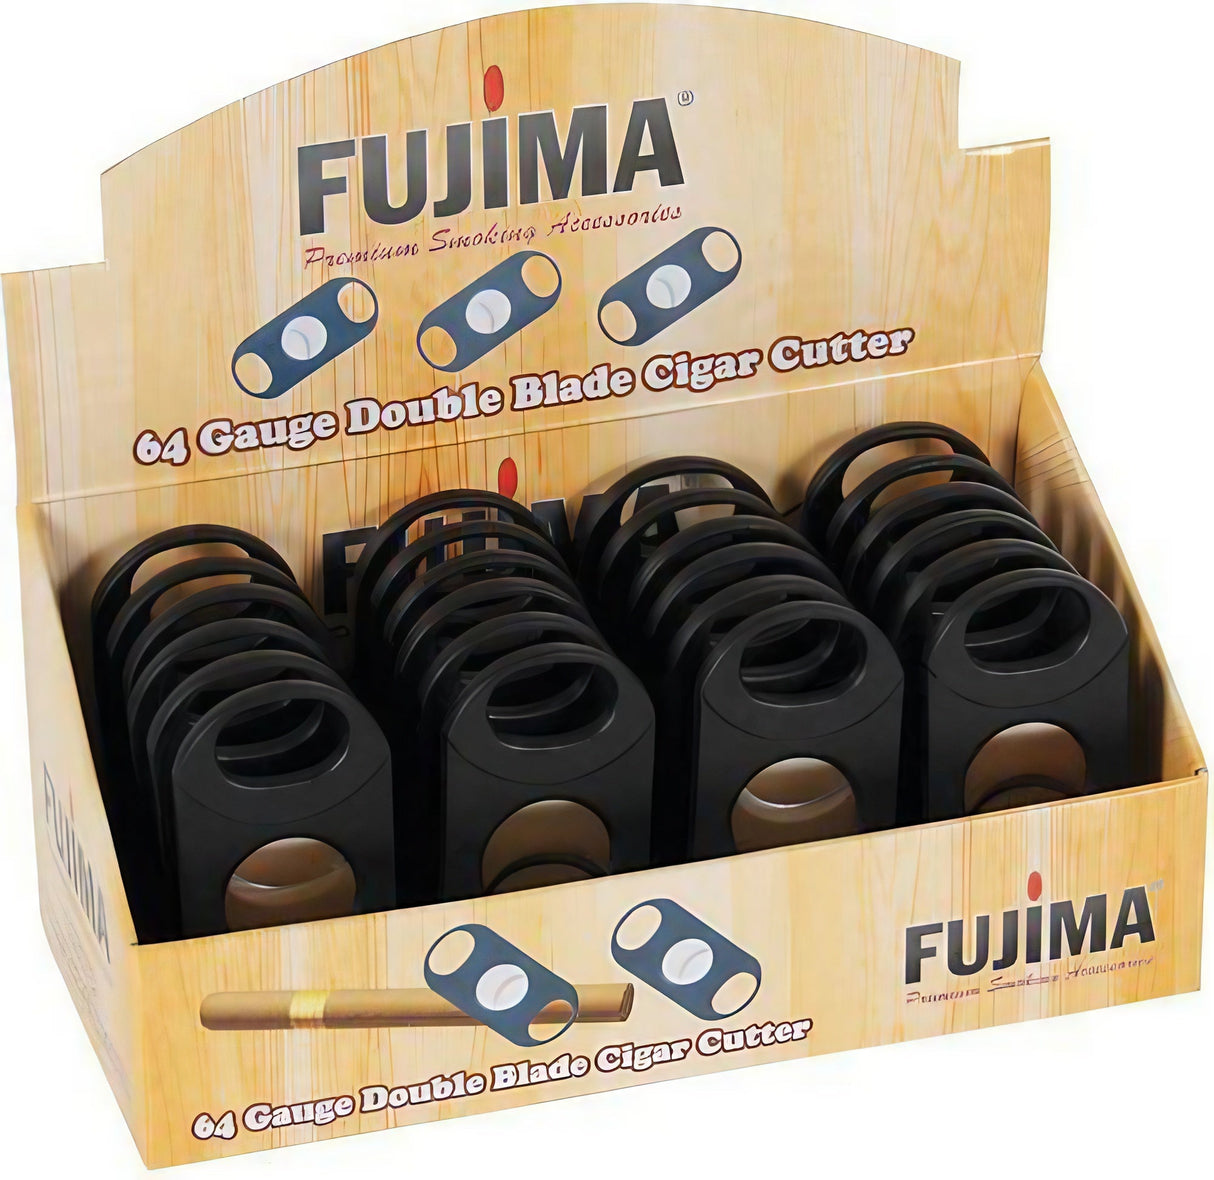 Fujima Double Blade Cigar Cutters, 24 Pack Display, Easy Grip Design